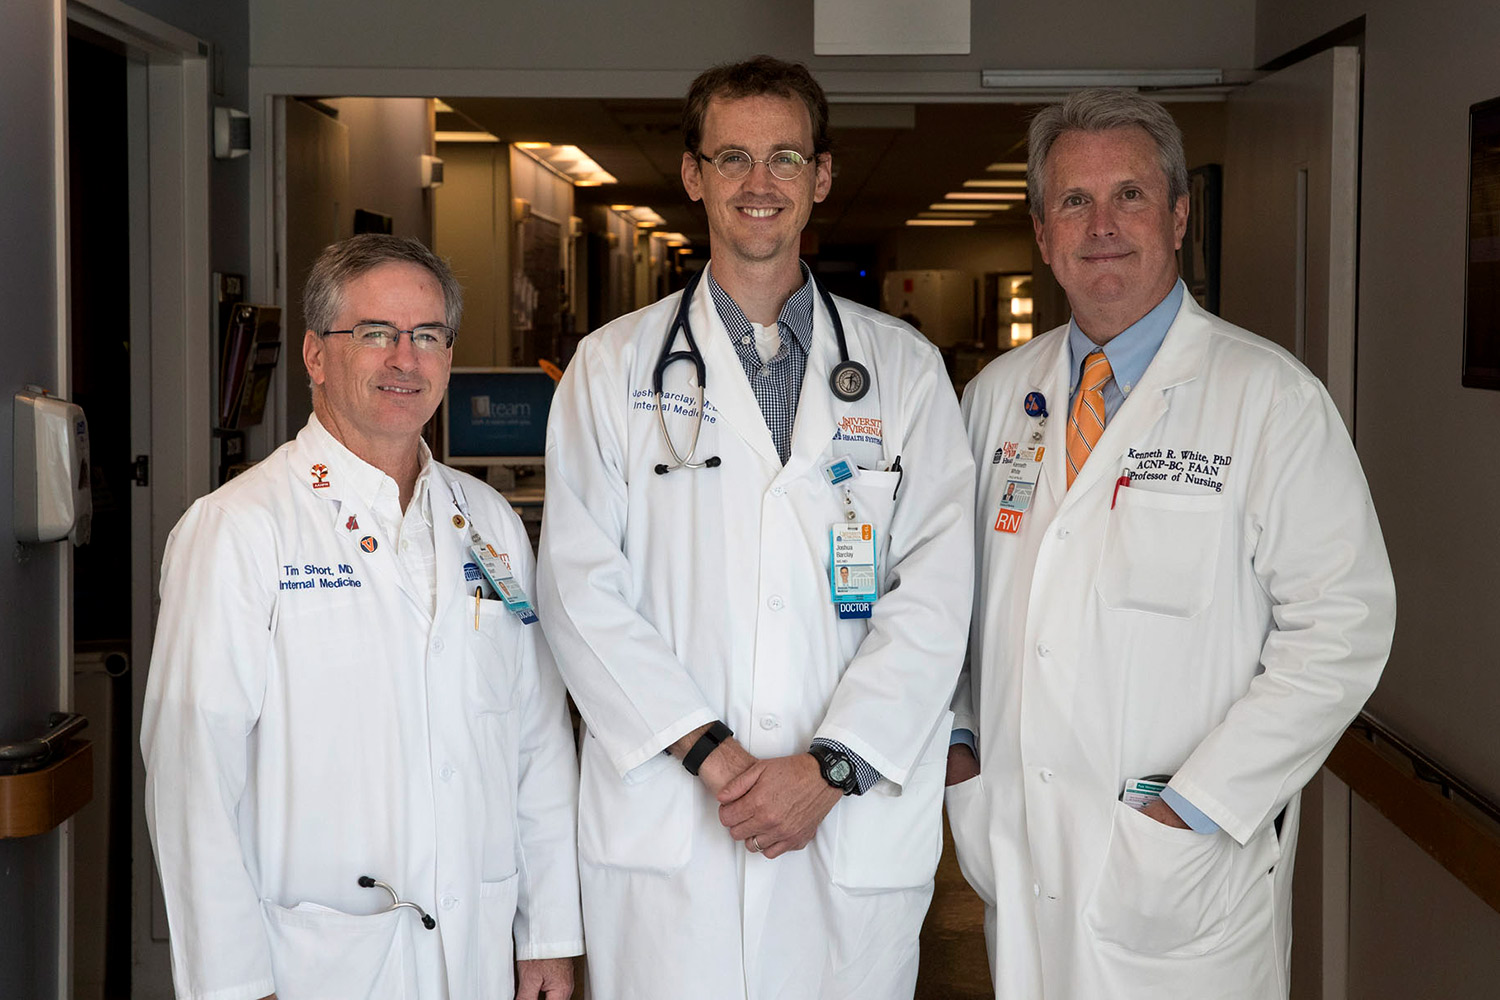 Dr. Tim Short, Dr. Joshua Barclay, and Ken White, a registered nurse and nurse practitioner, specialize in palliative care at the University of Virginia Medical Center. 